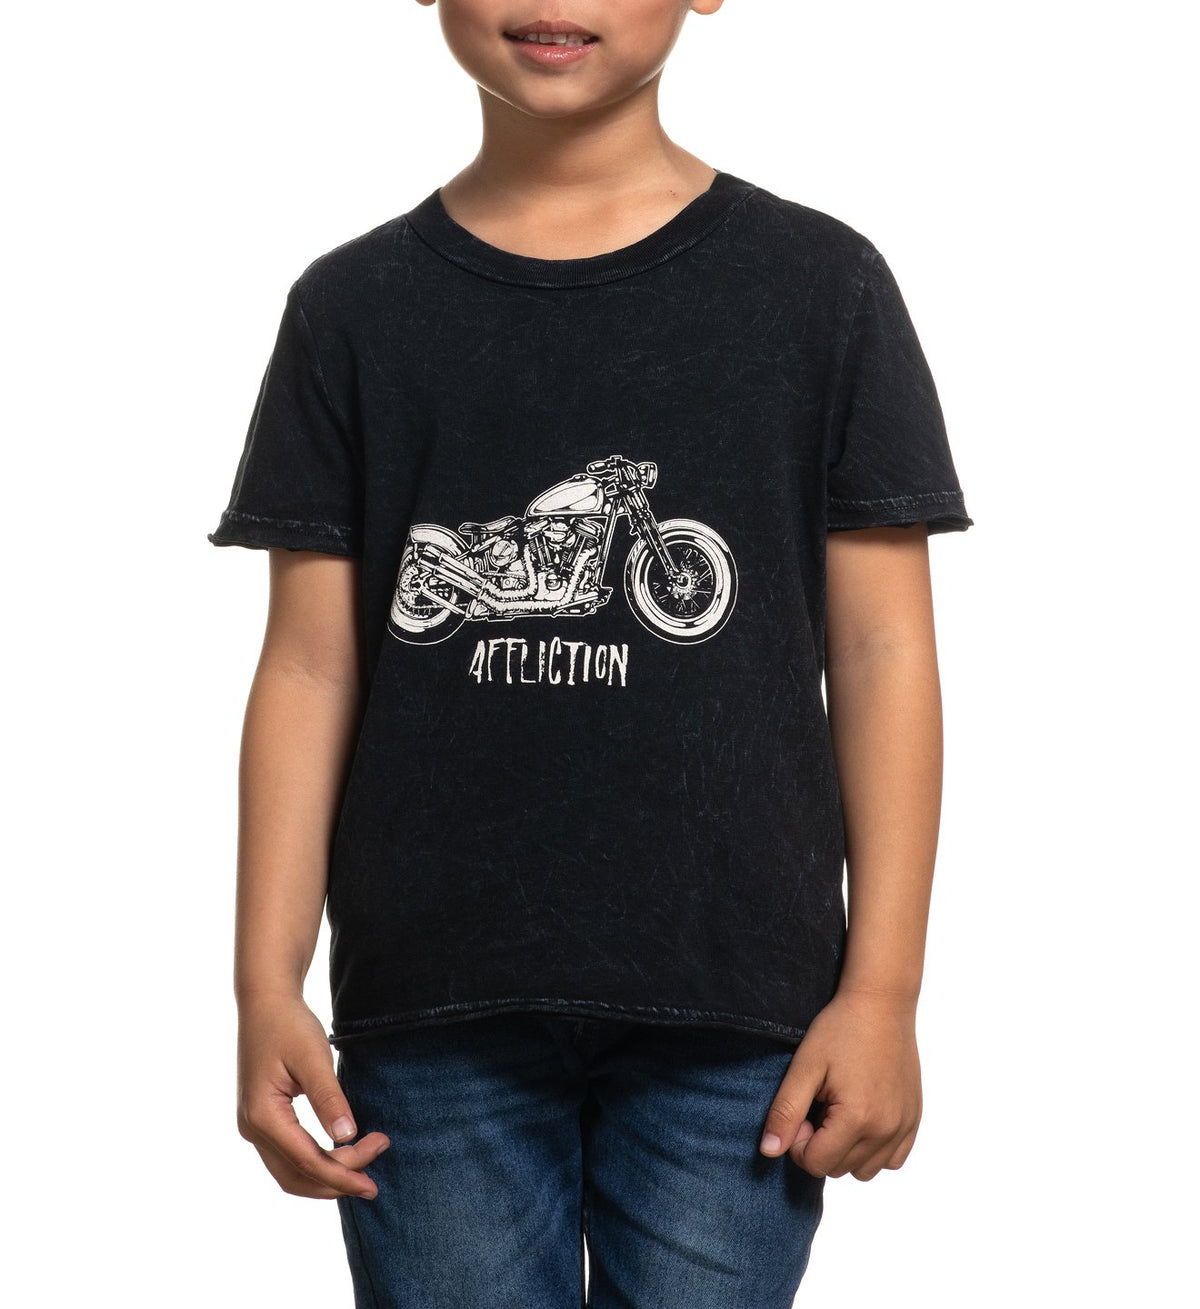 Moto Creed-Toddler - Toddlers Short Sleeve Tees - Affliction Clothing